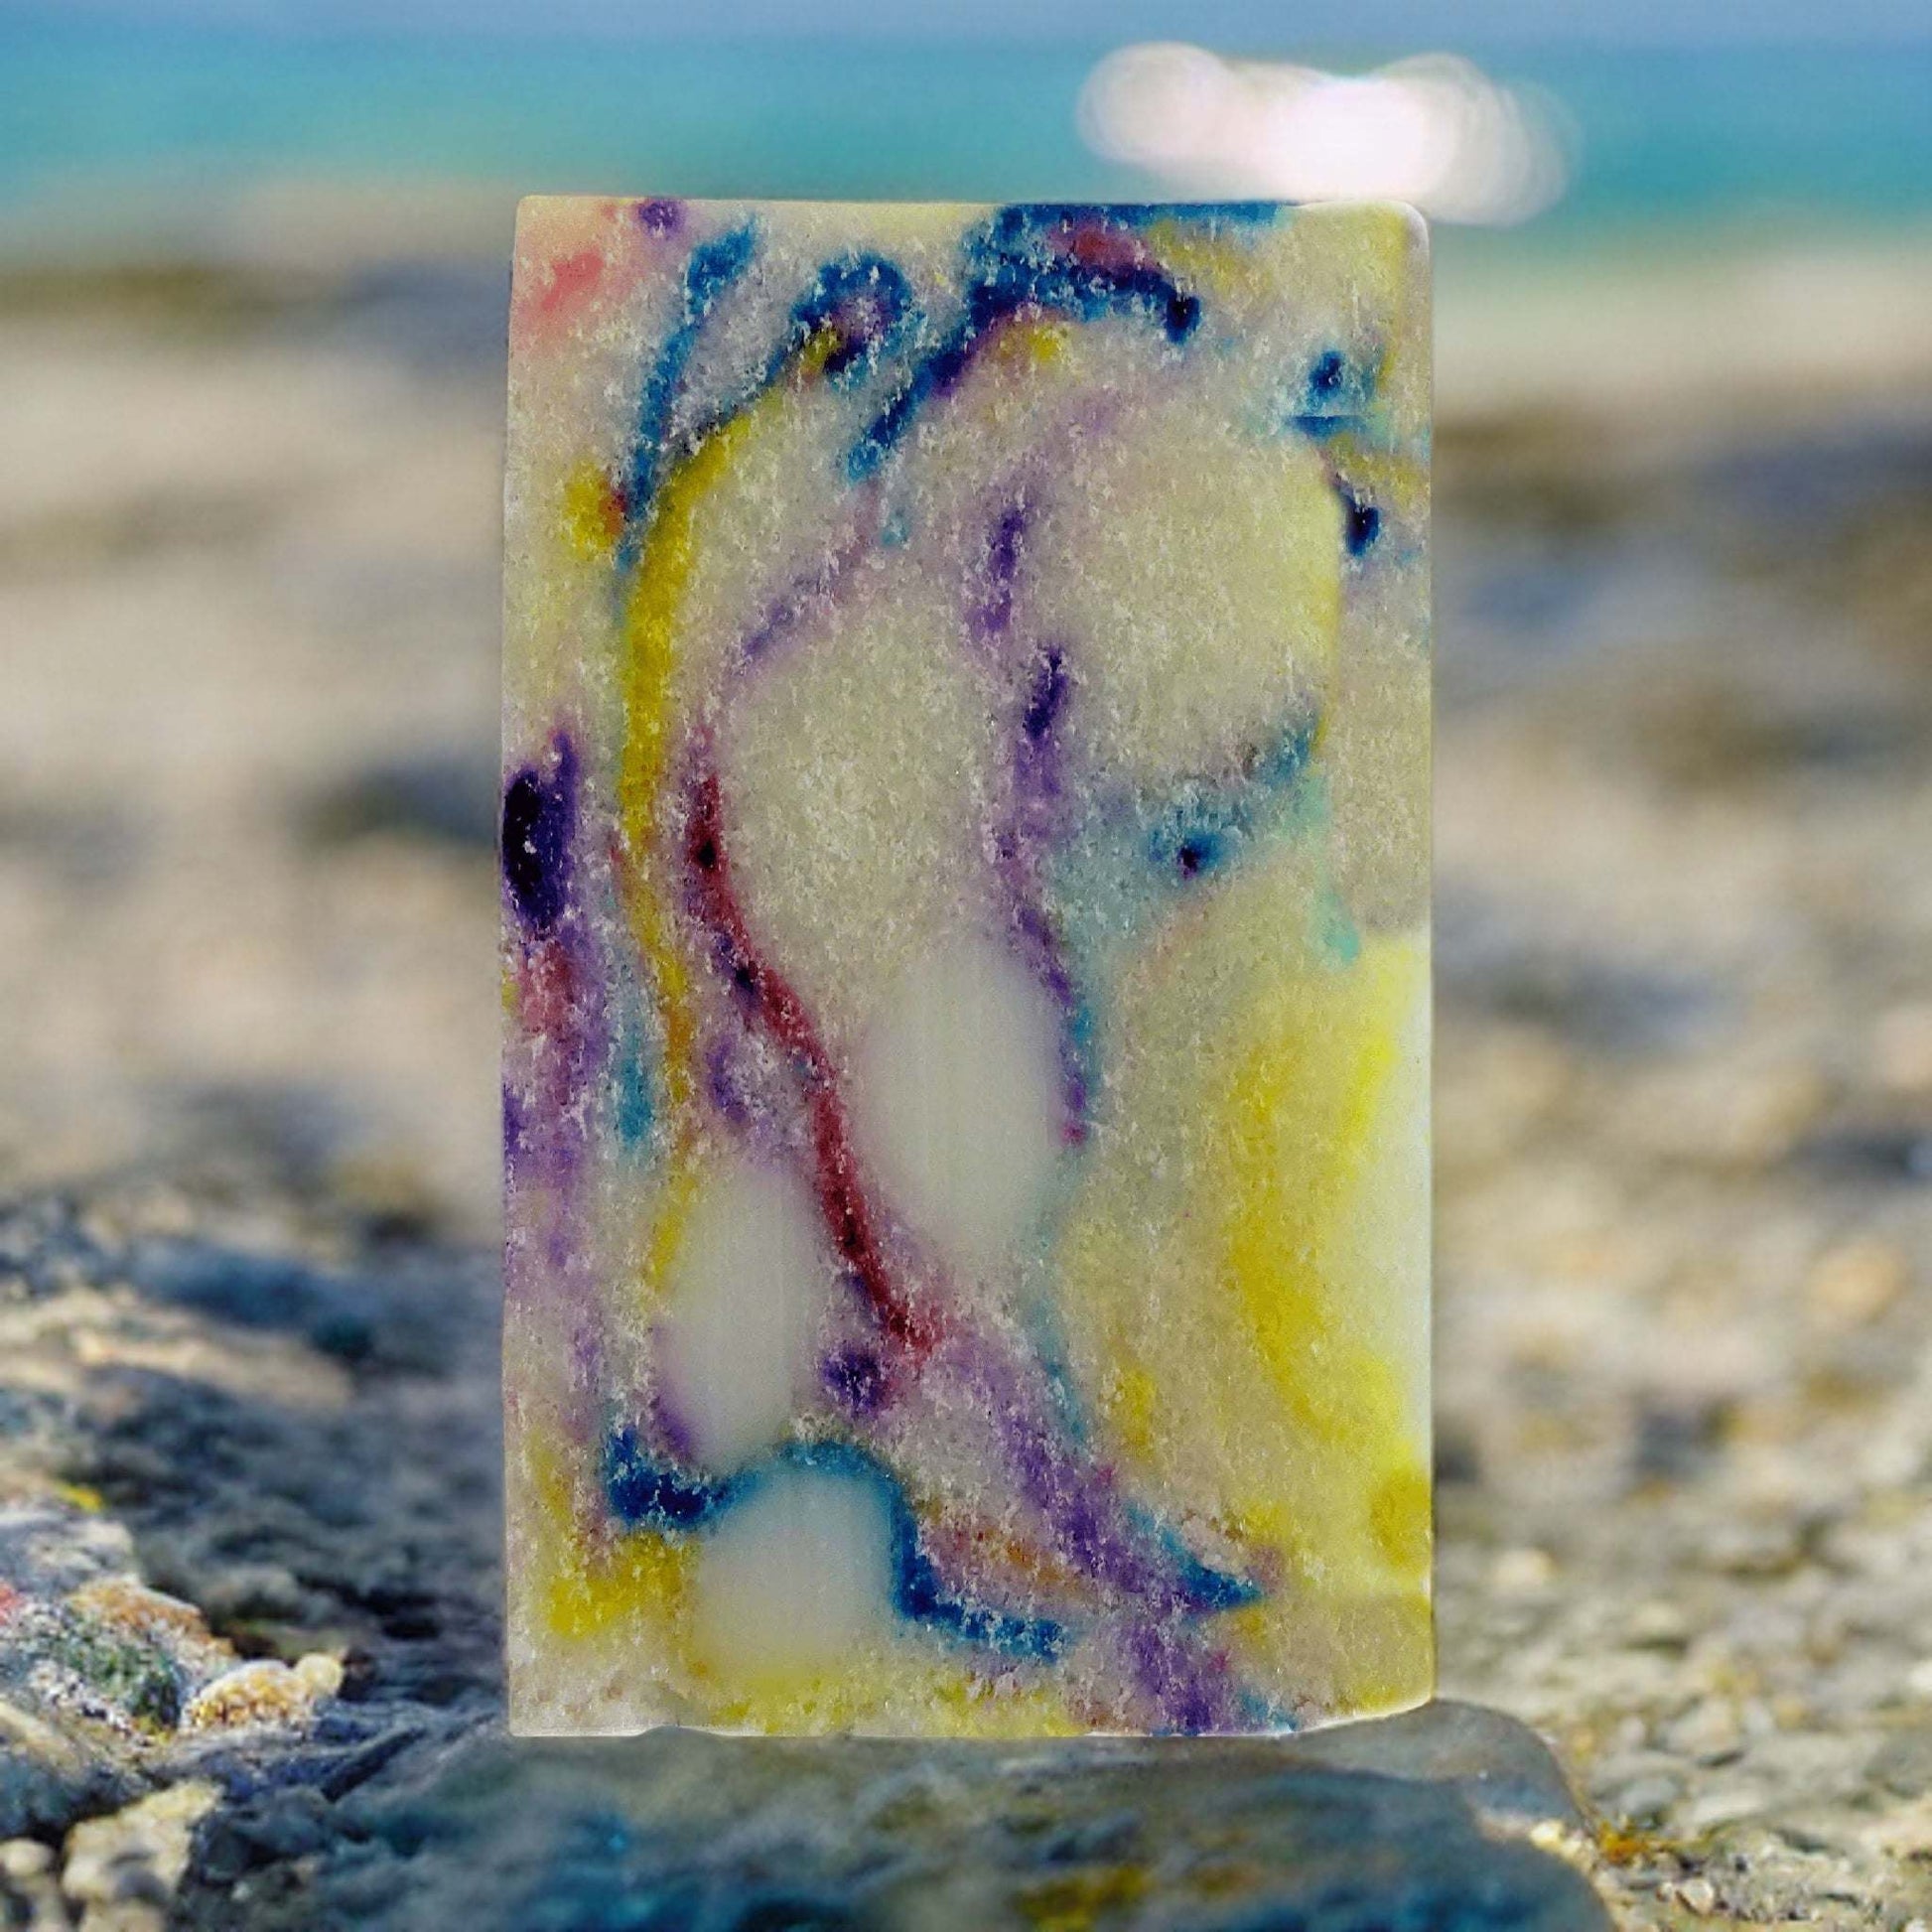 Experience the magic with our Unicorn Dreams Sugar Scrub Shower Bar! It's not just cleansing, it's an enchanting journey.